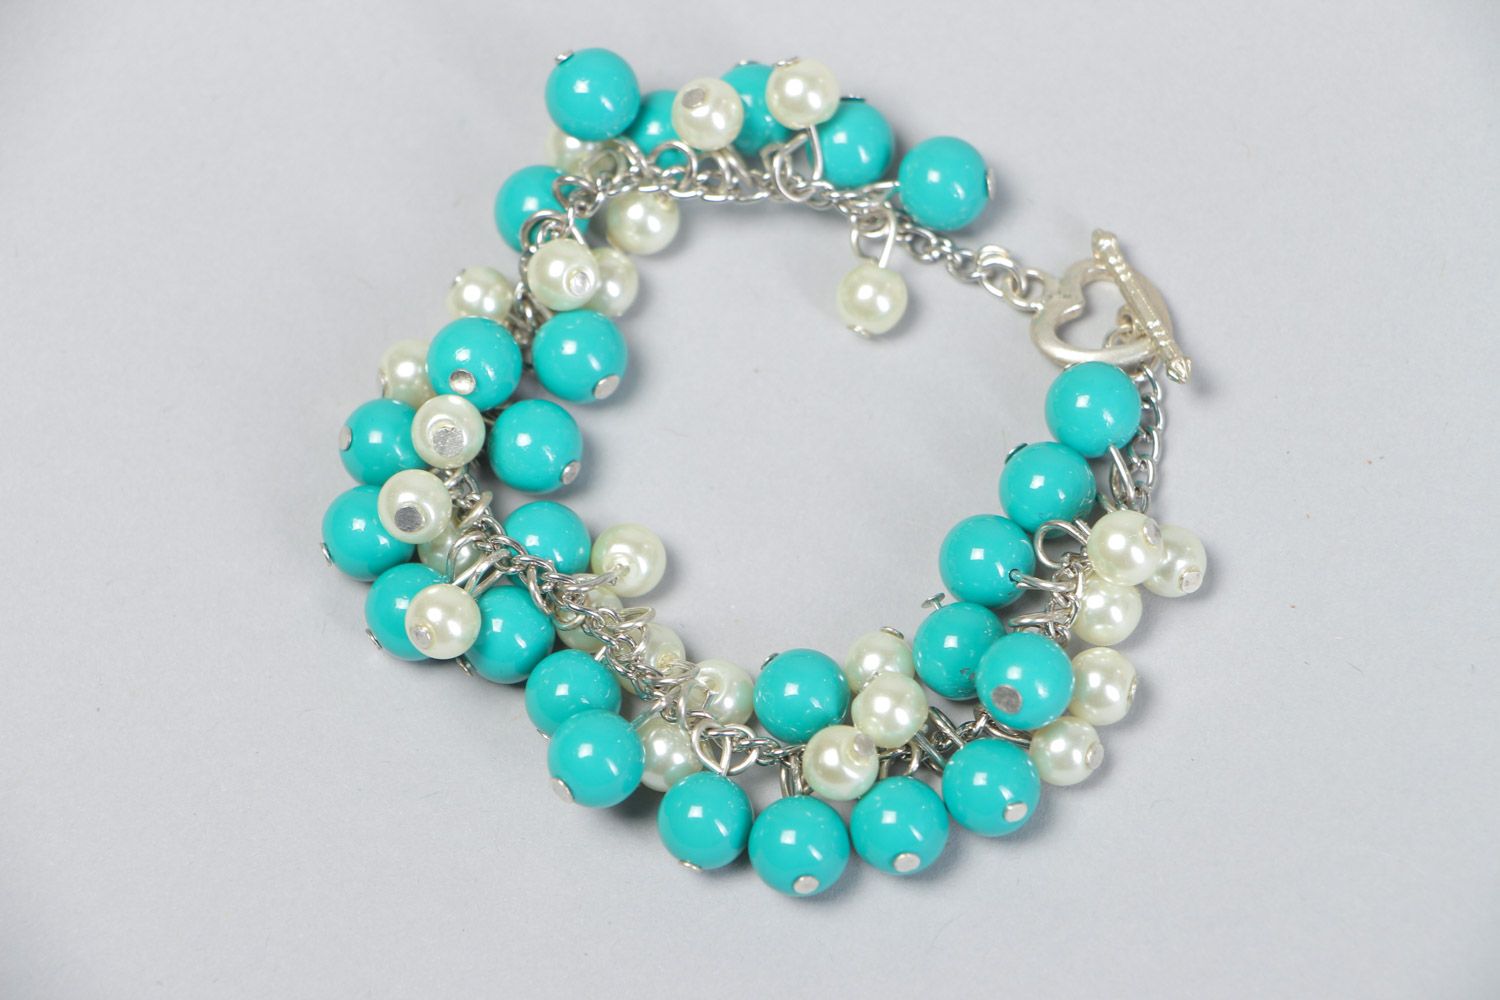 Handmade bright stylish beaded wrist bracelet with charms of turquoise and white colors photo 2